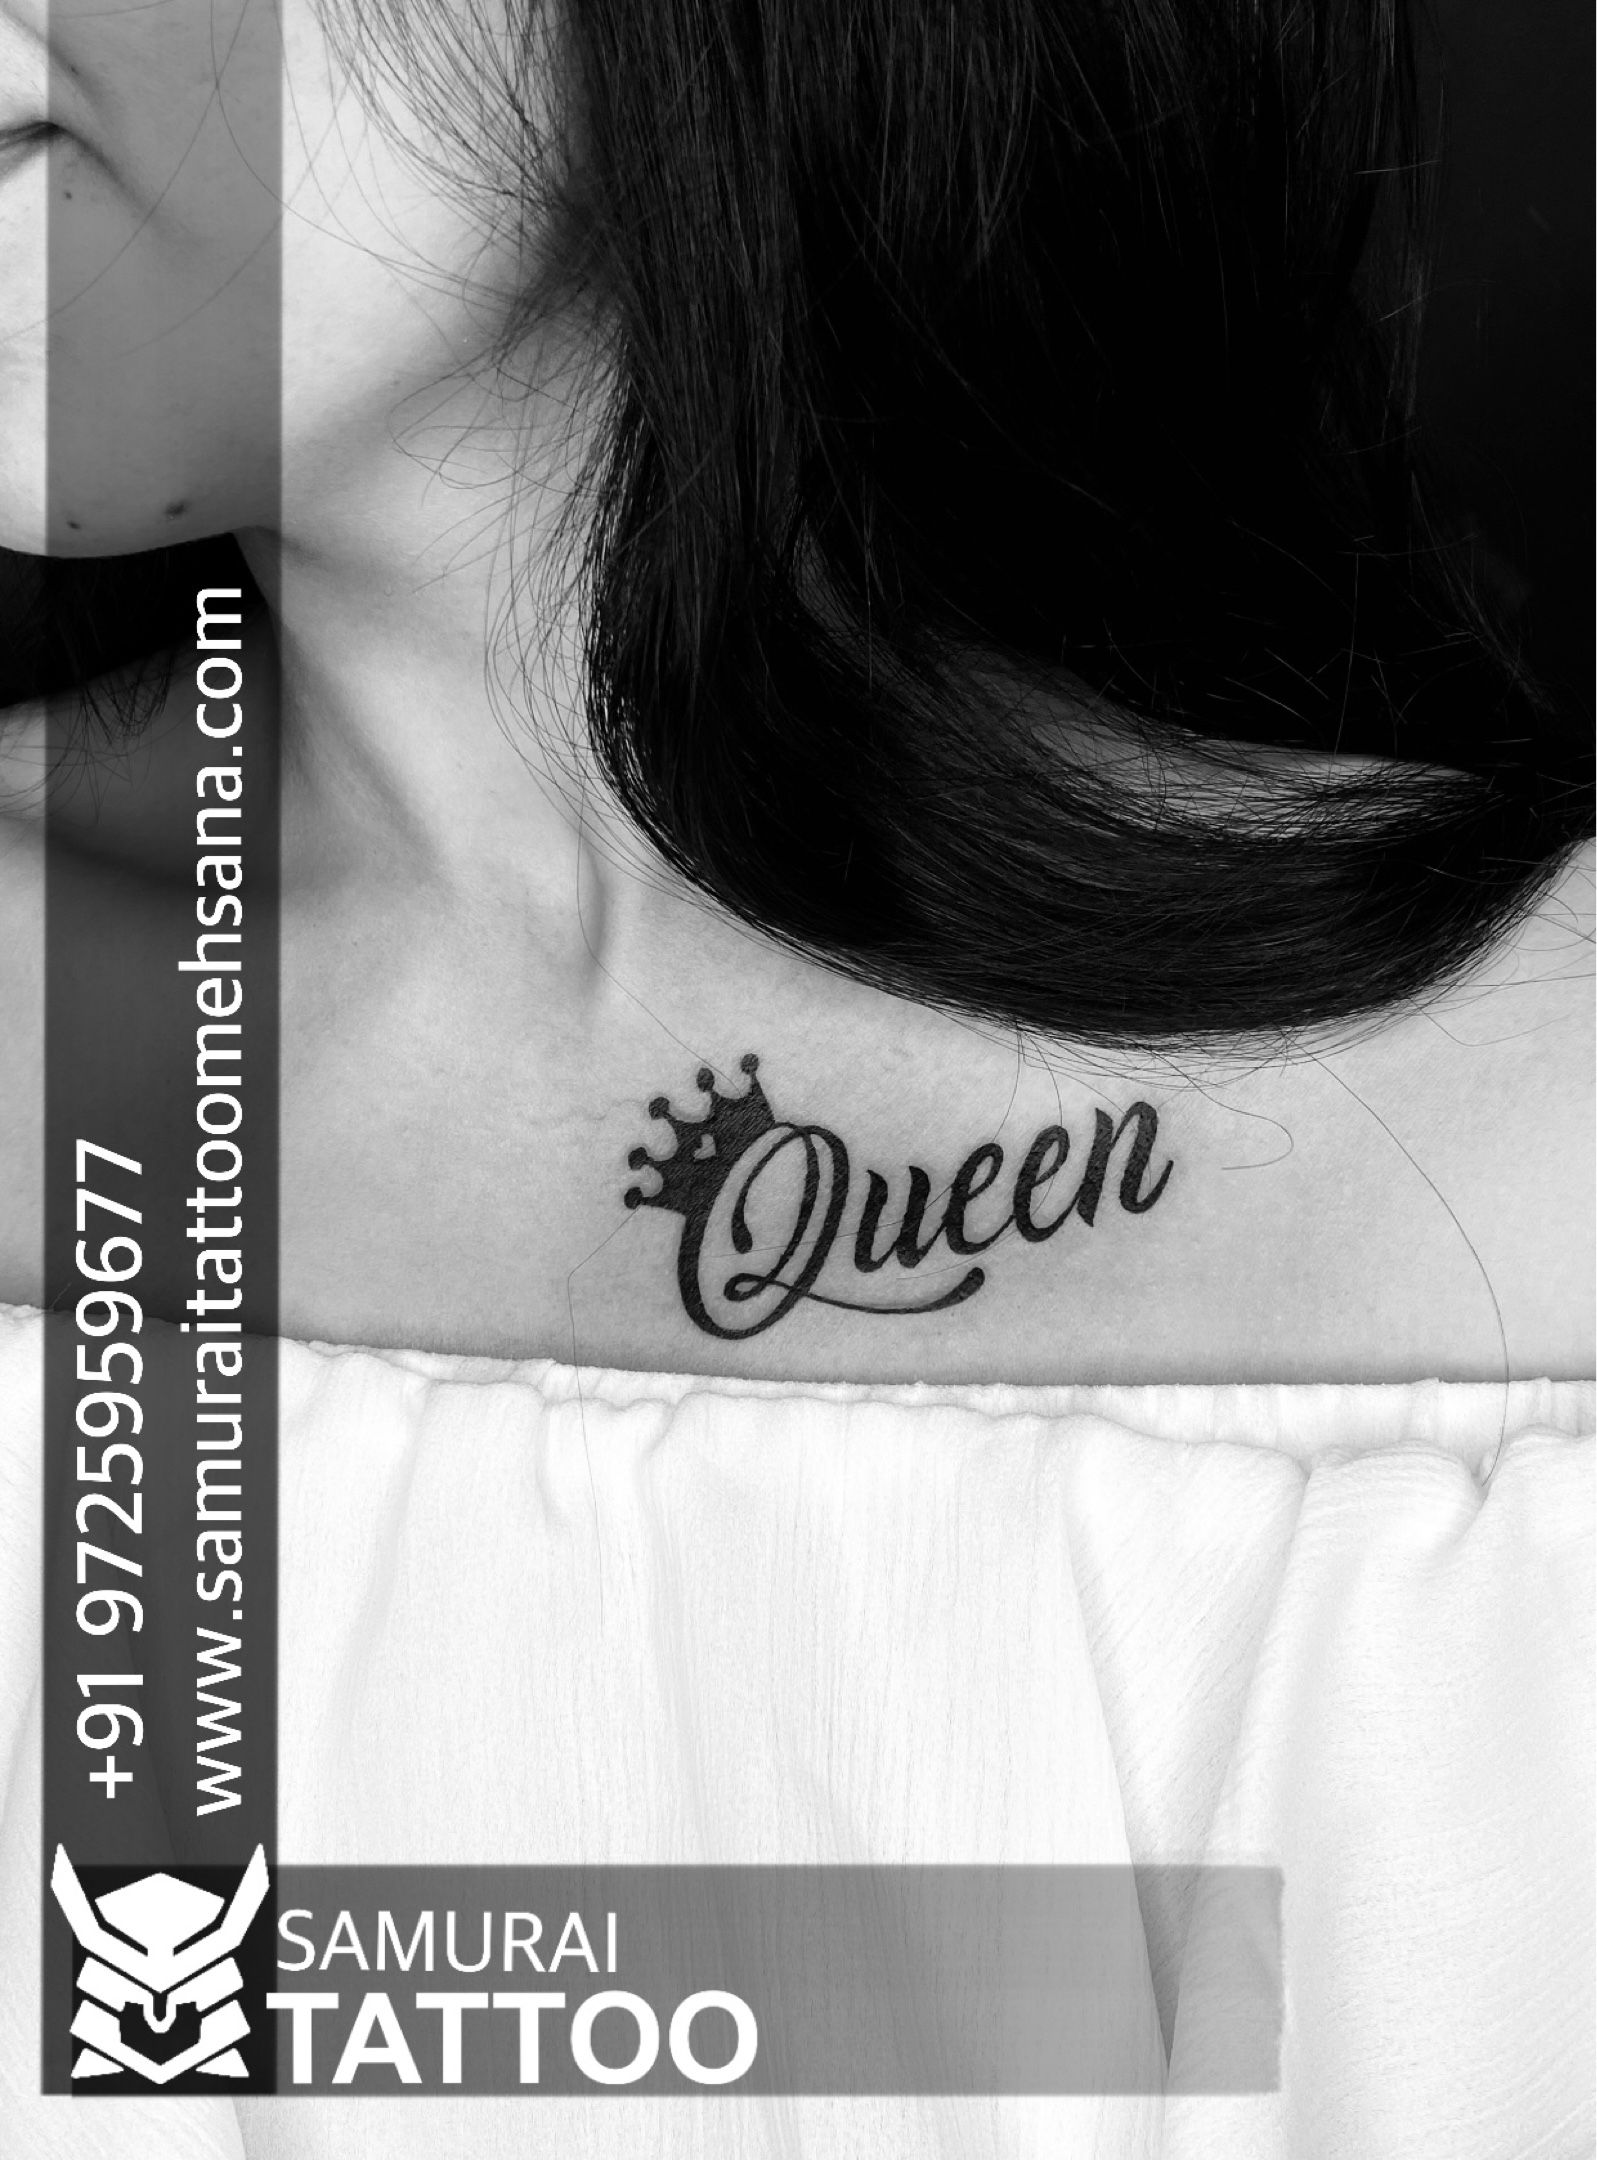 Traditional Egyptian Queen Tattoo - Best Tattoo Ideas Gallery